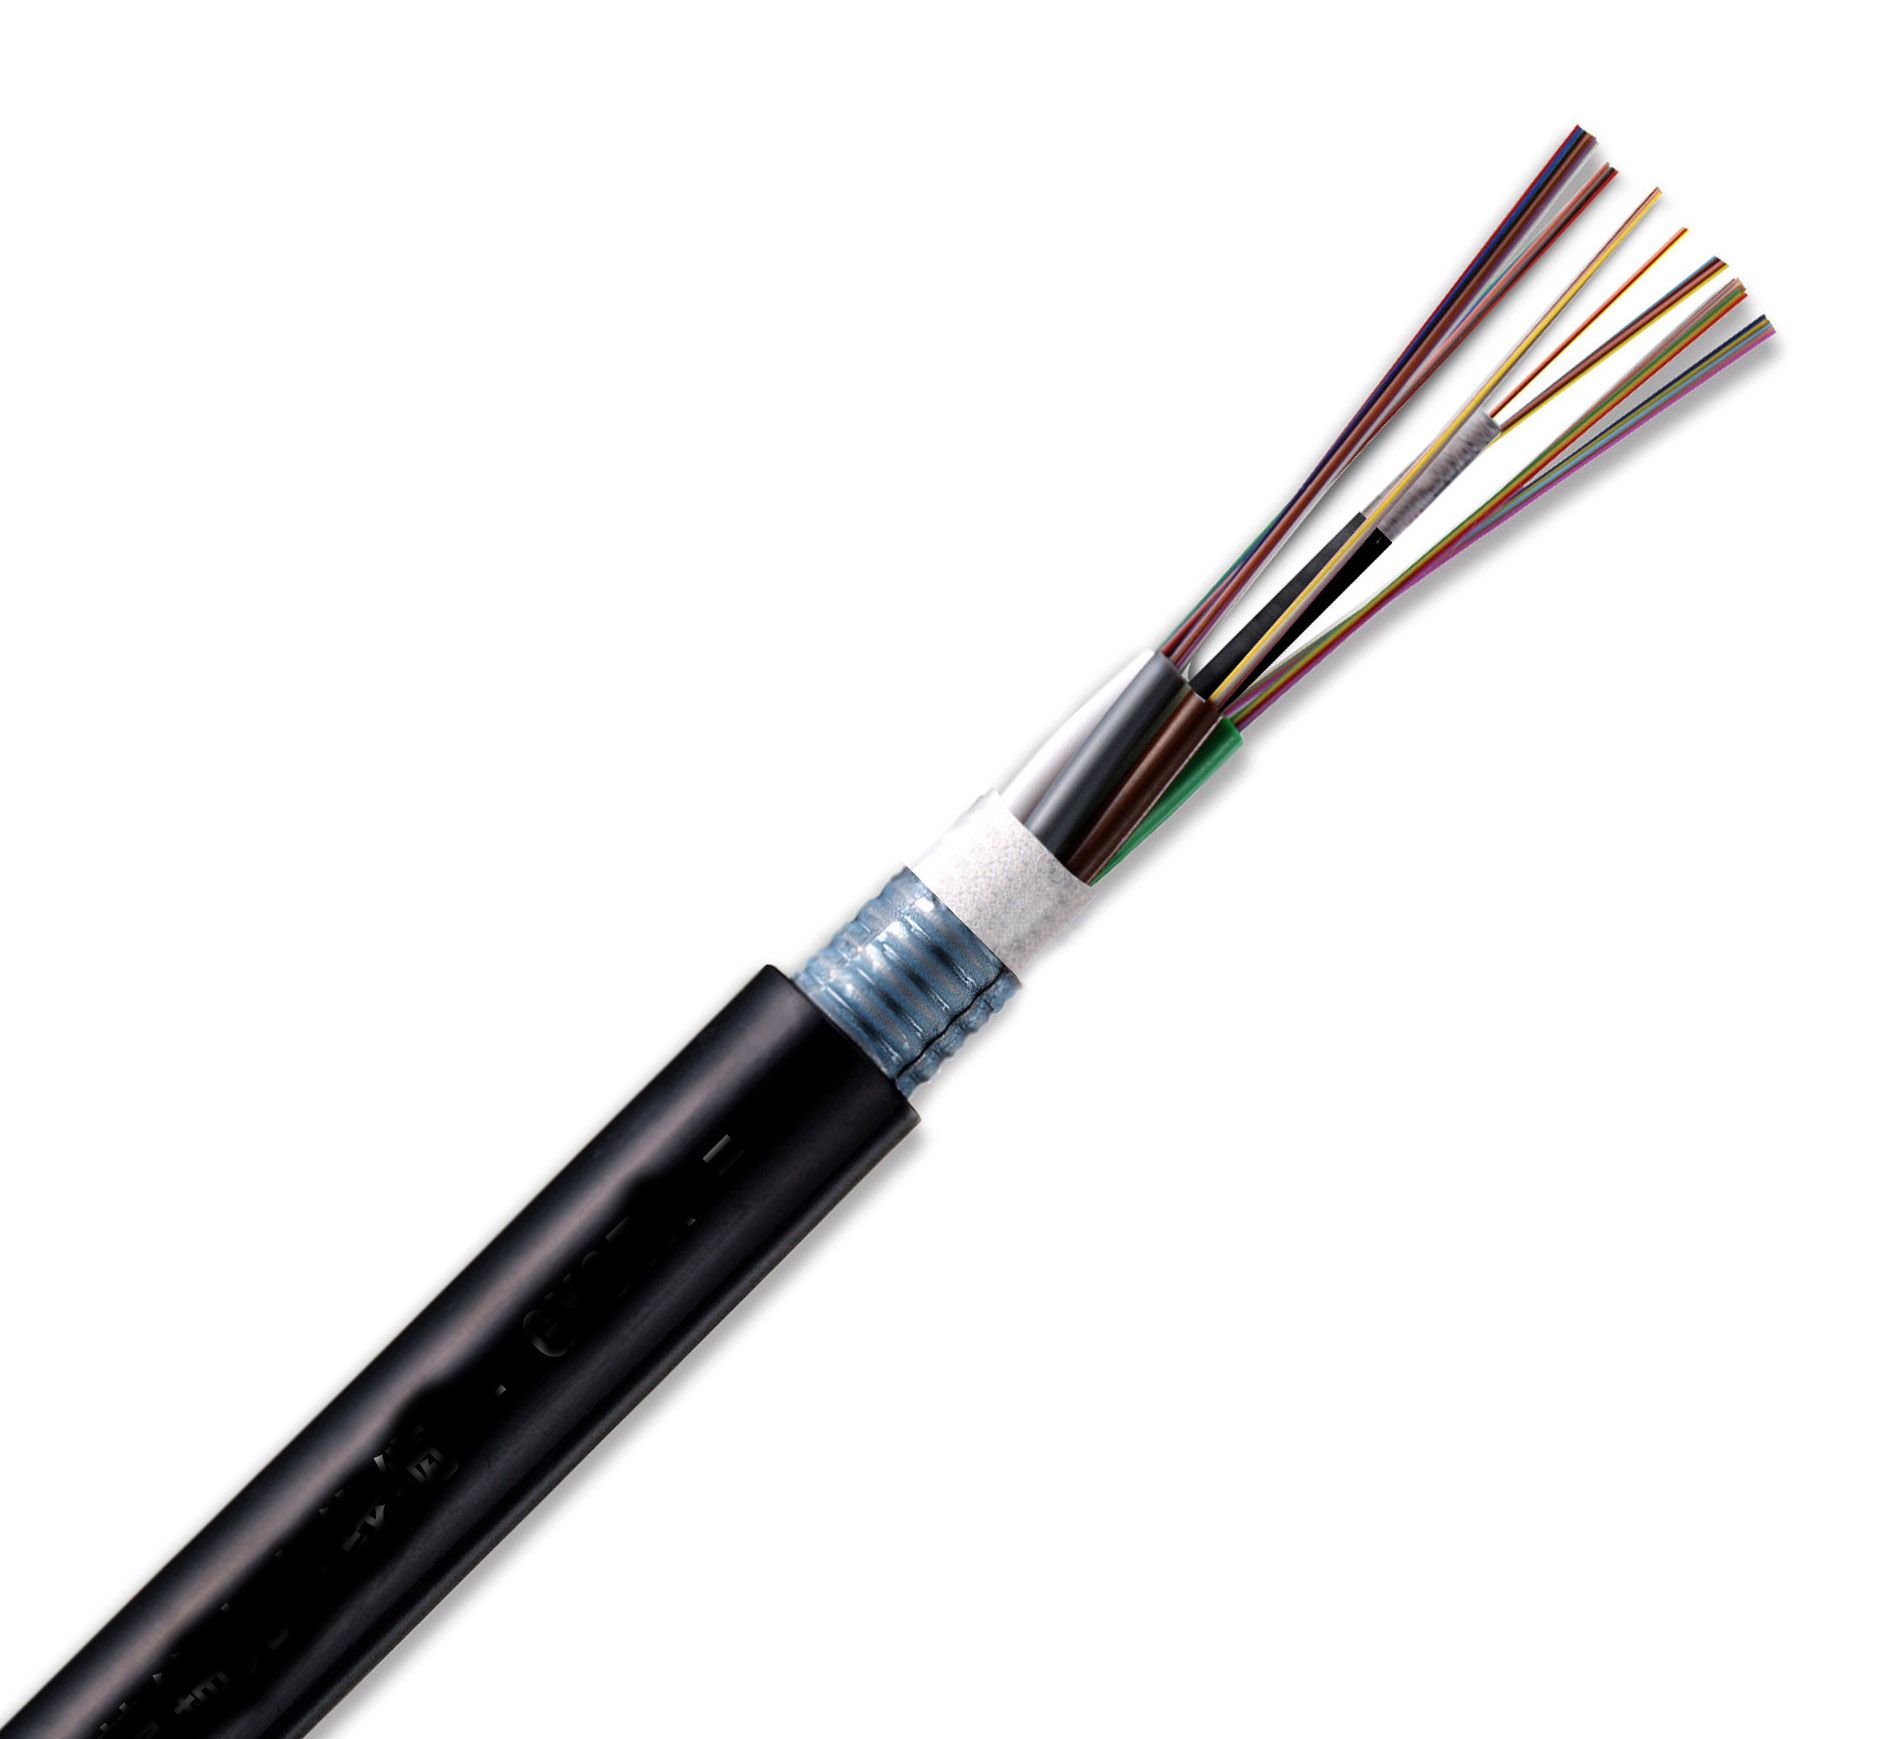 GYTA53 - Layer-stranded Reinforced Armored and Double Sheathed Optical Cable 